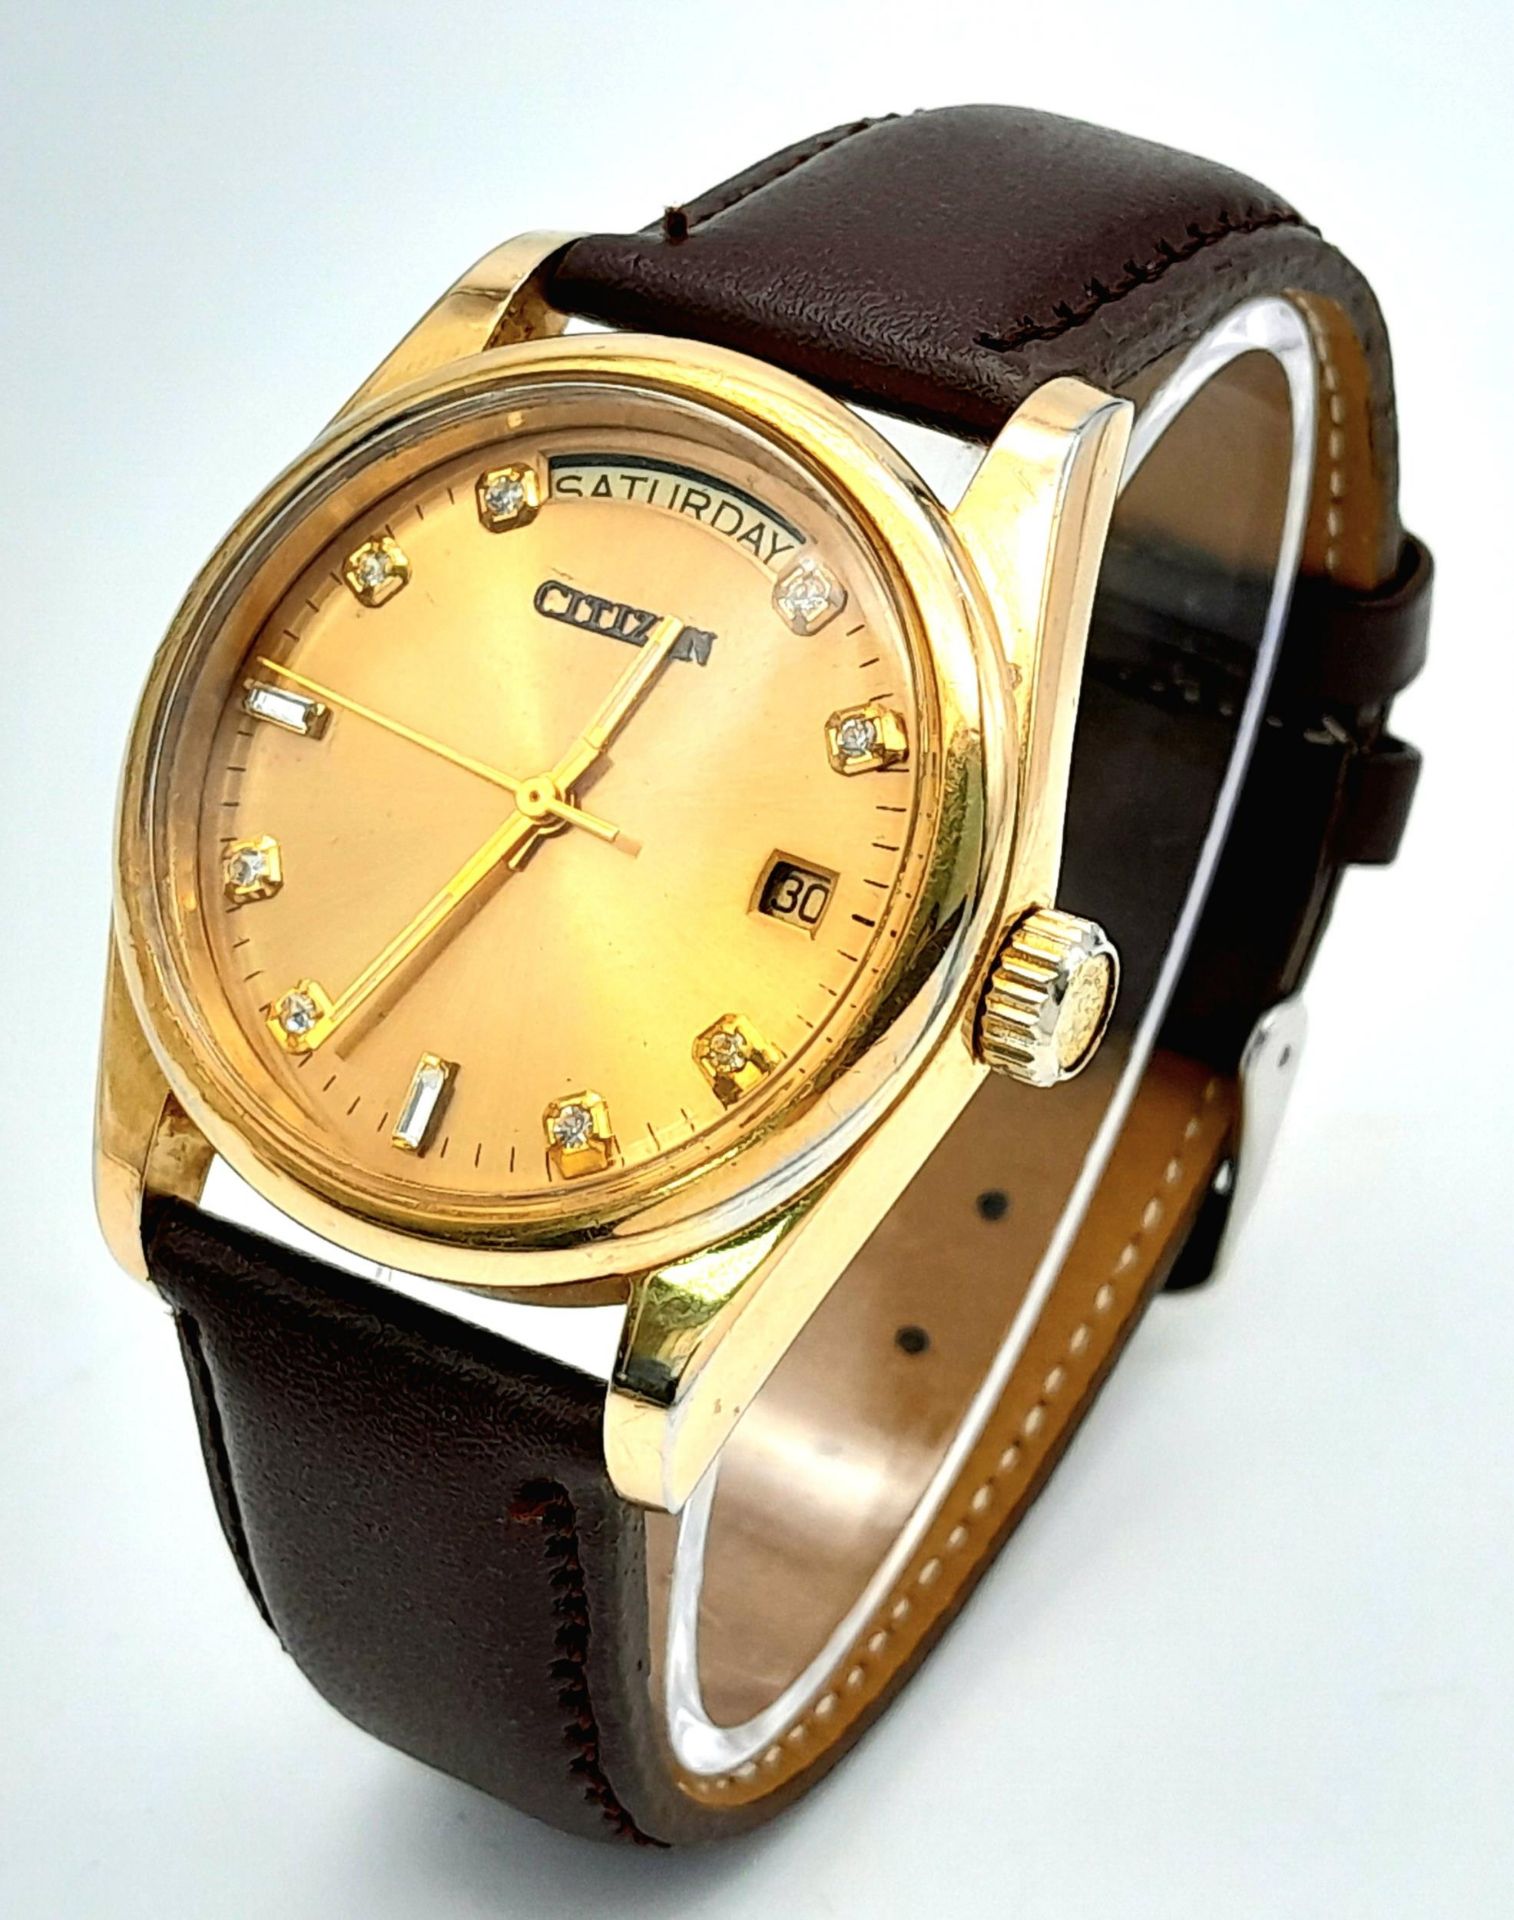 A Citizen Automatic Stone Set Watch. Brown leather strap. Gold plated case - 36mm. Gold tone dial